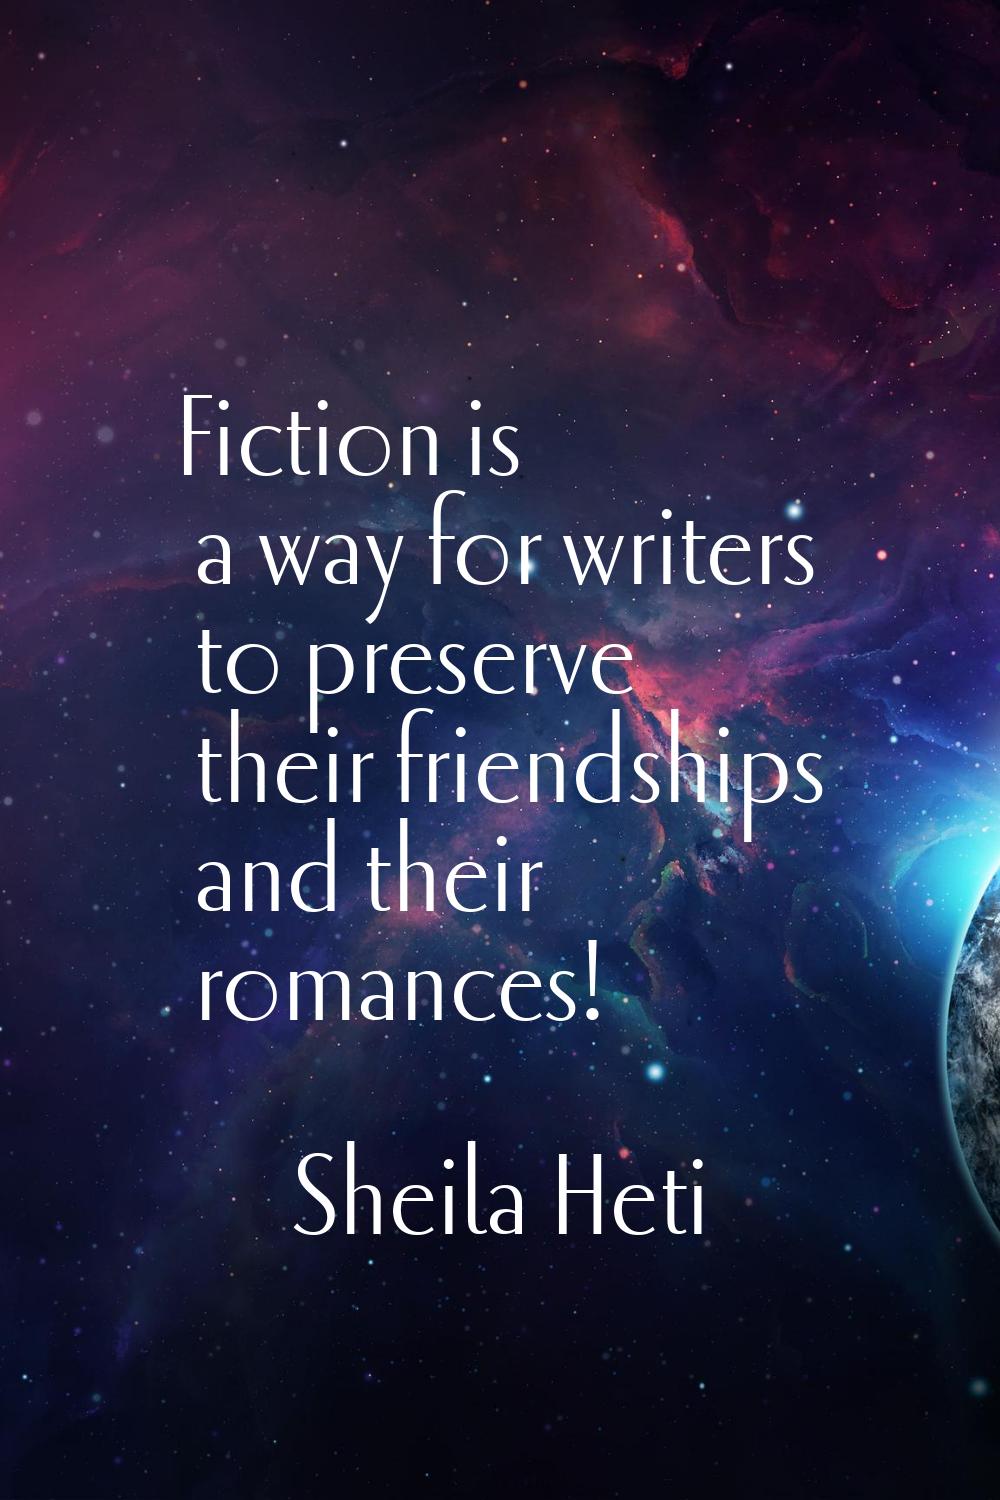 Fiction is a way for writers to preserve their friendships and their romances!